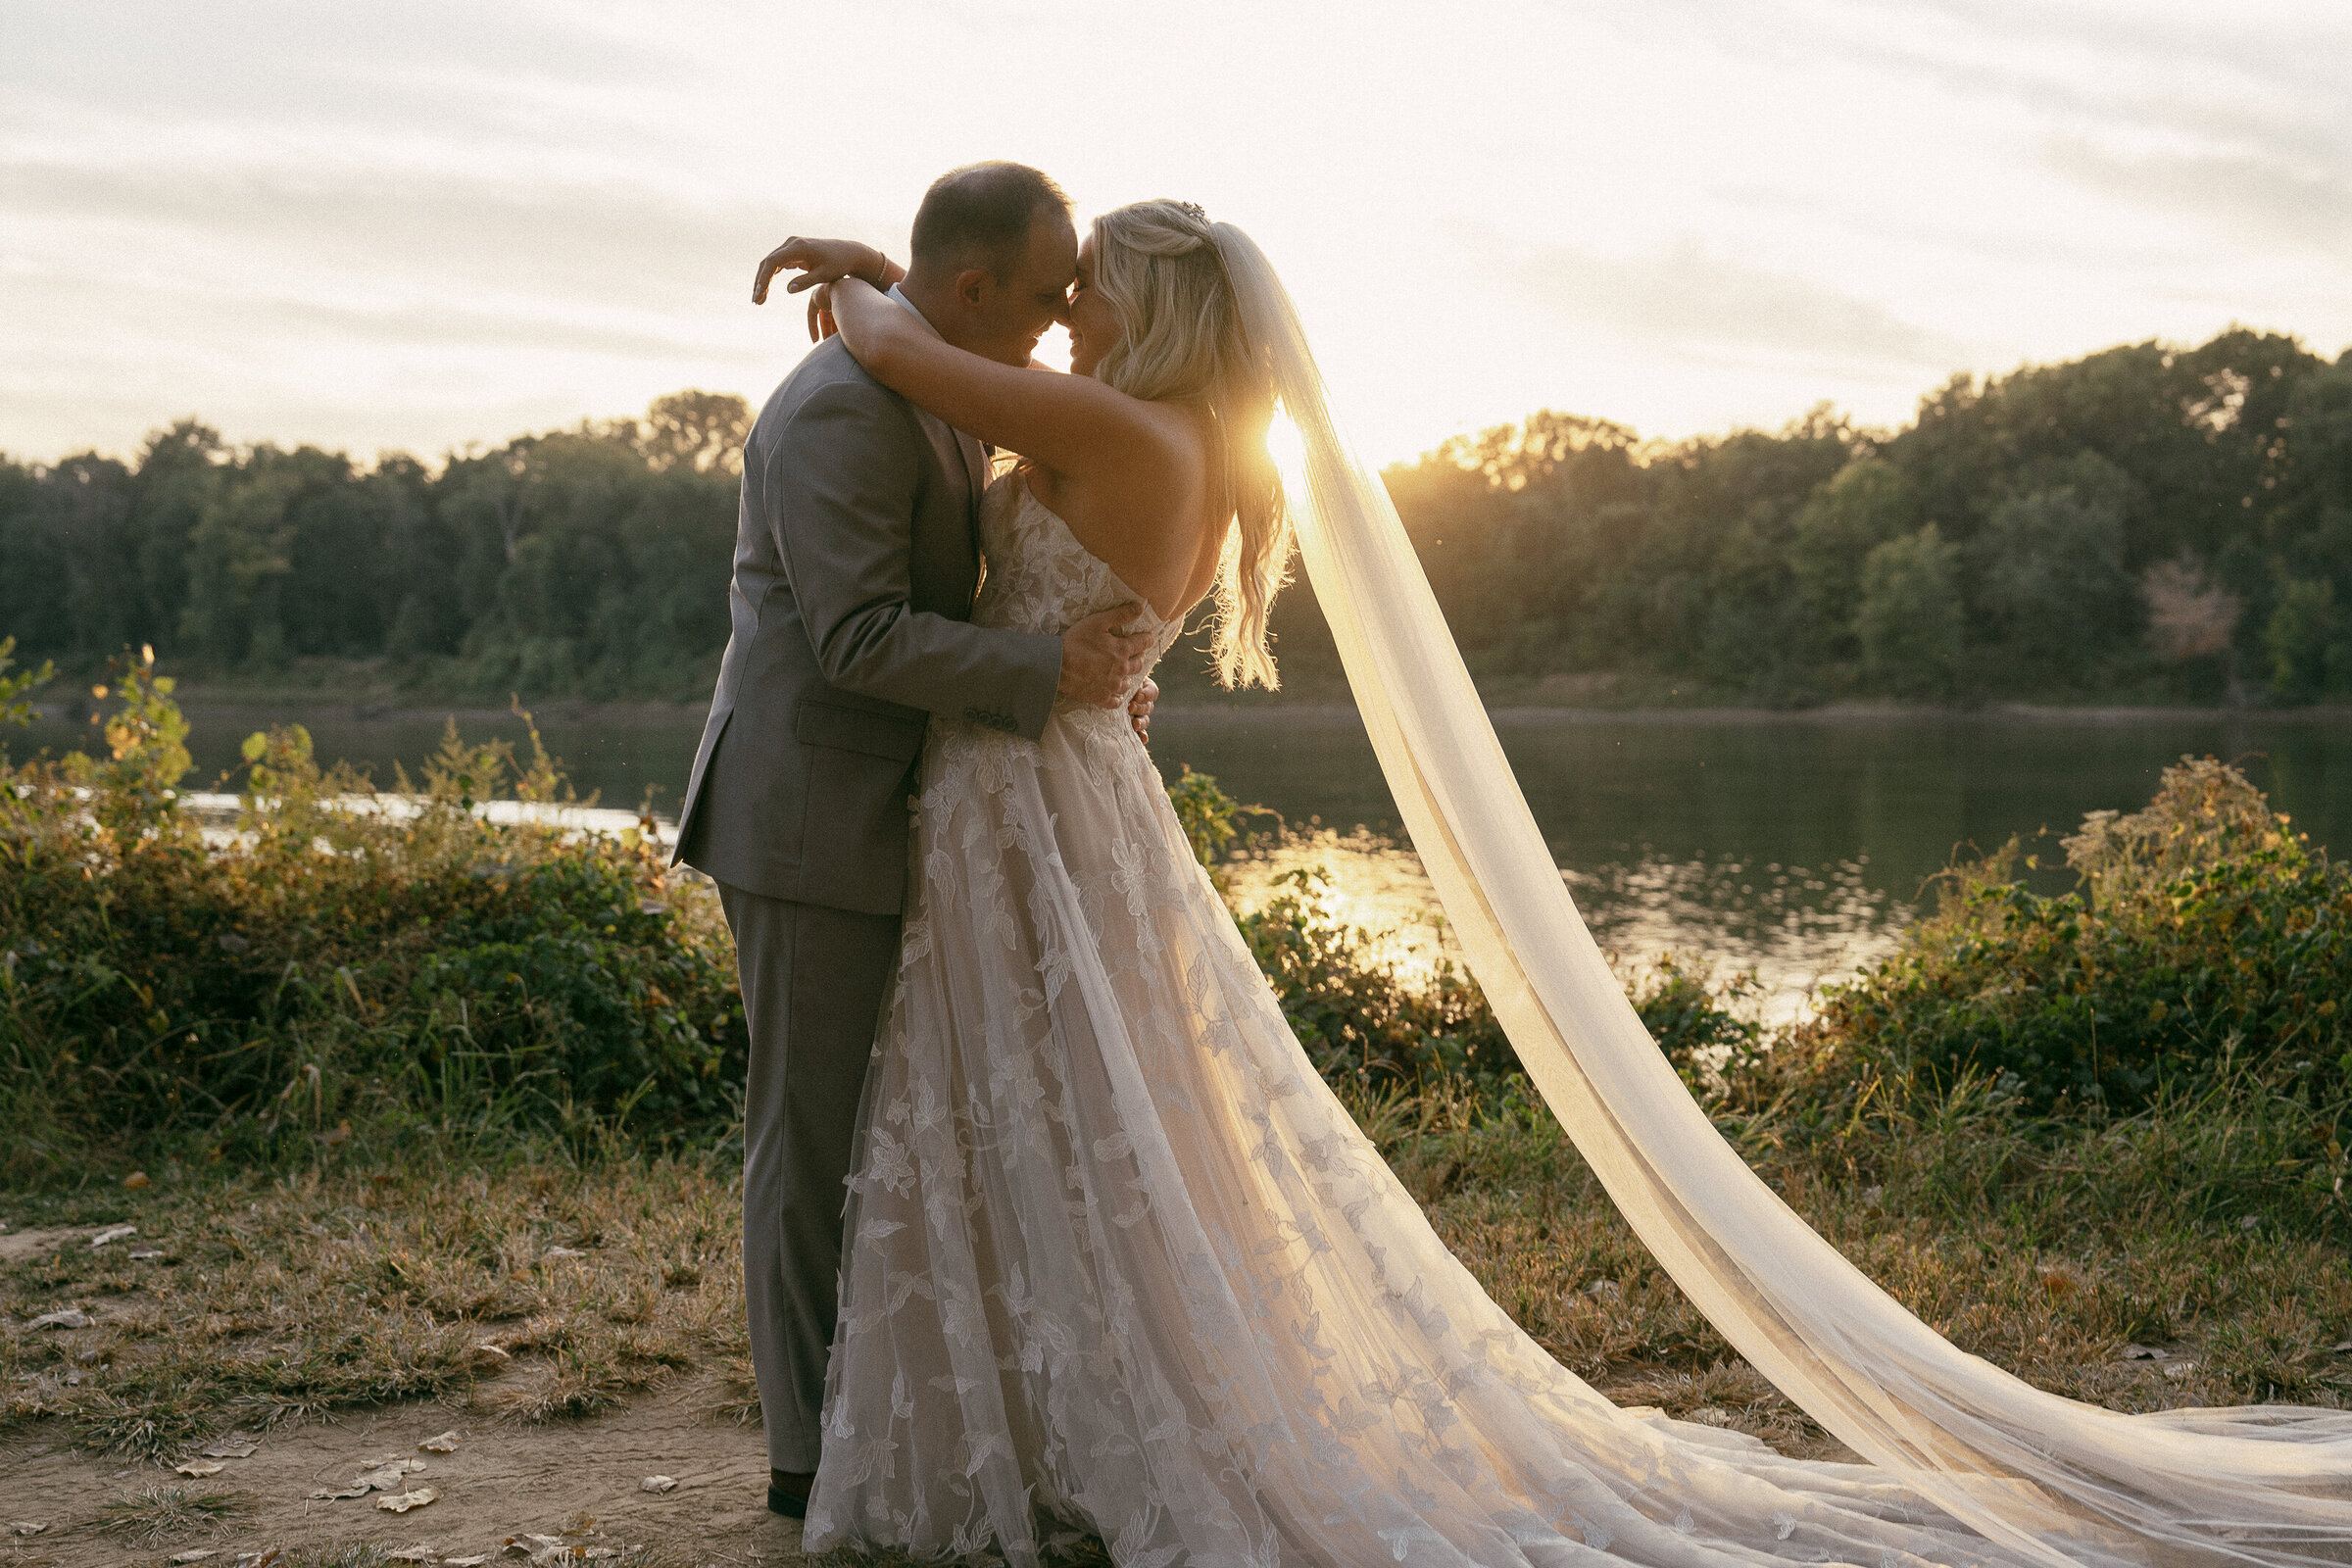 Second shot of bride and groom's sunset embrace by river in wedding attire